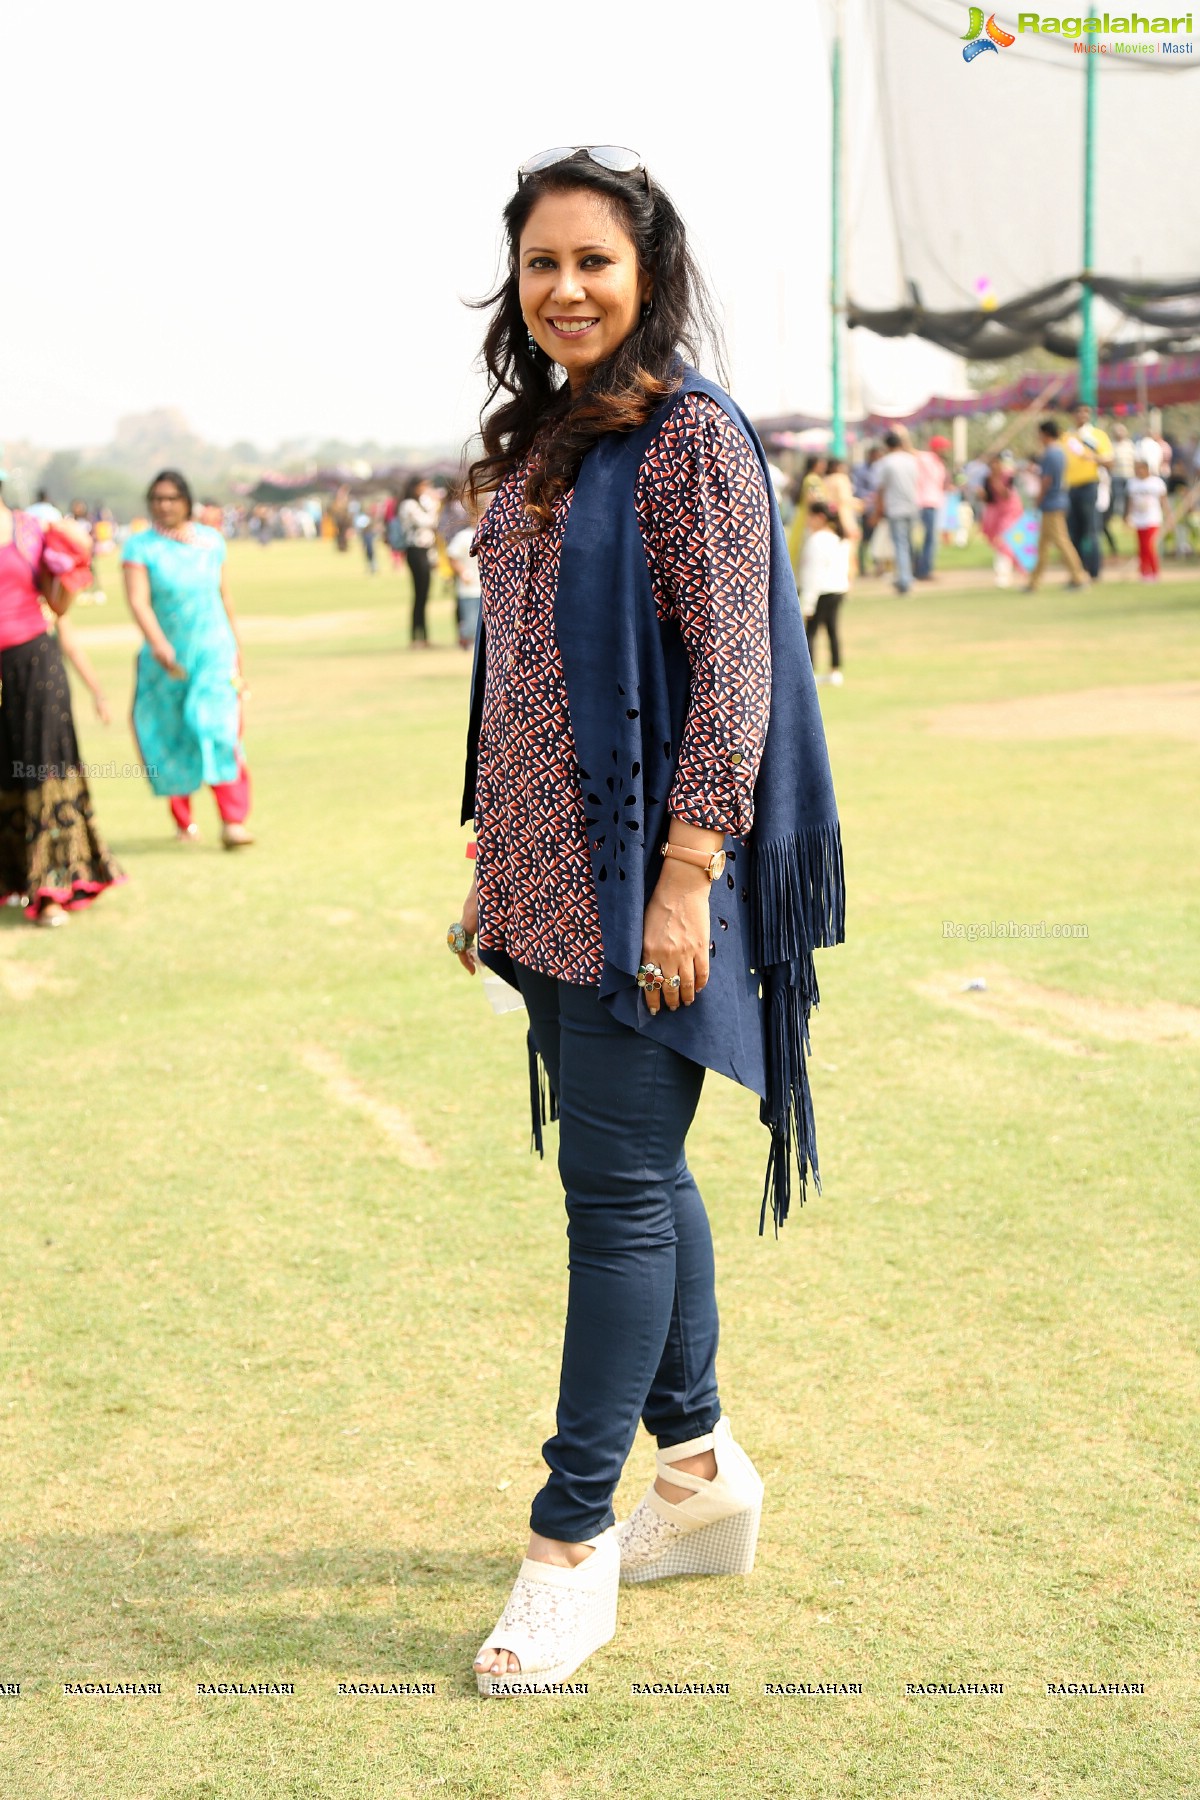 Hyderabad Kite Fest 2017 at Golf Course Road